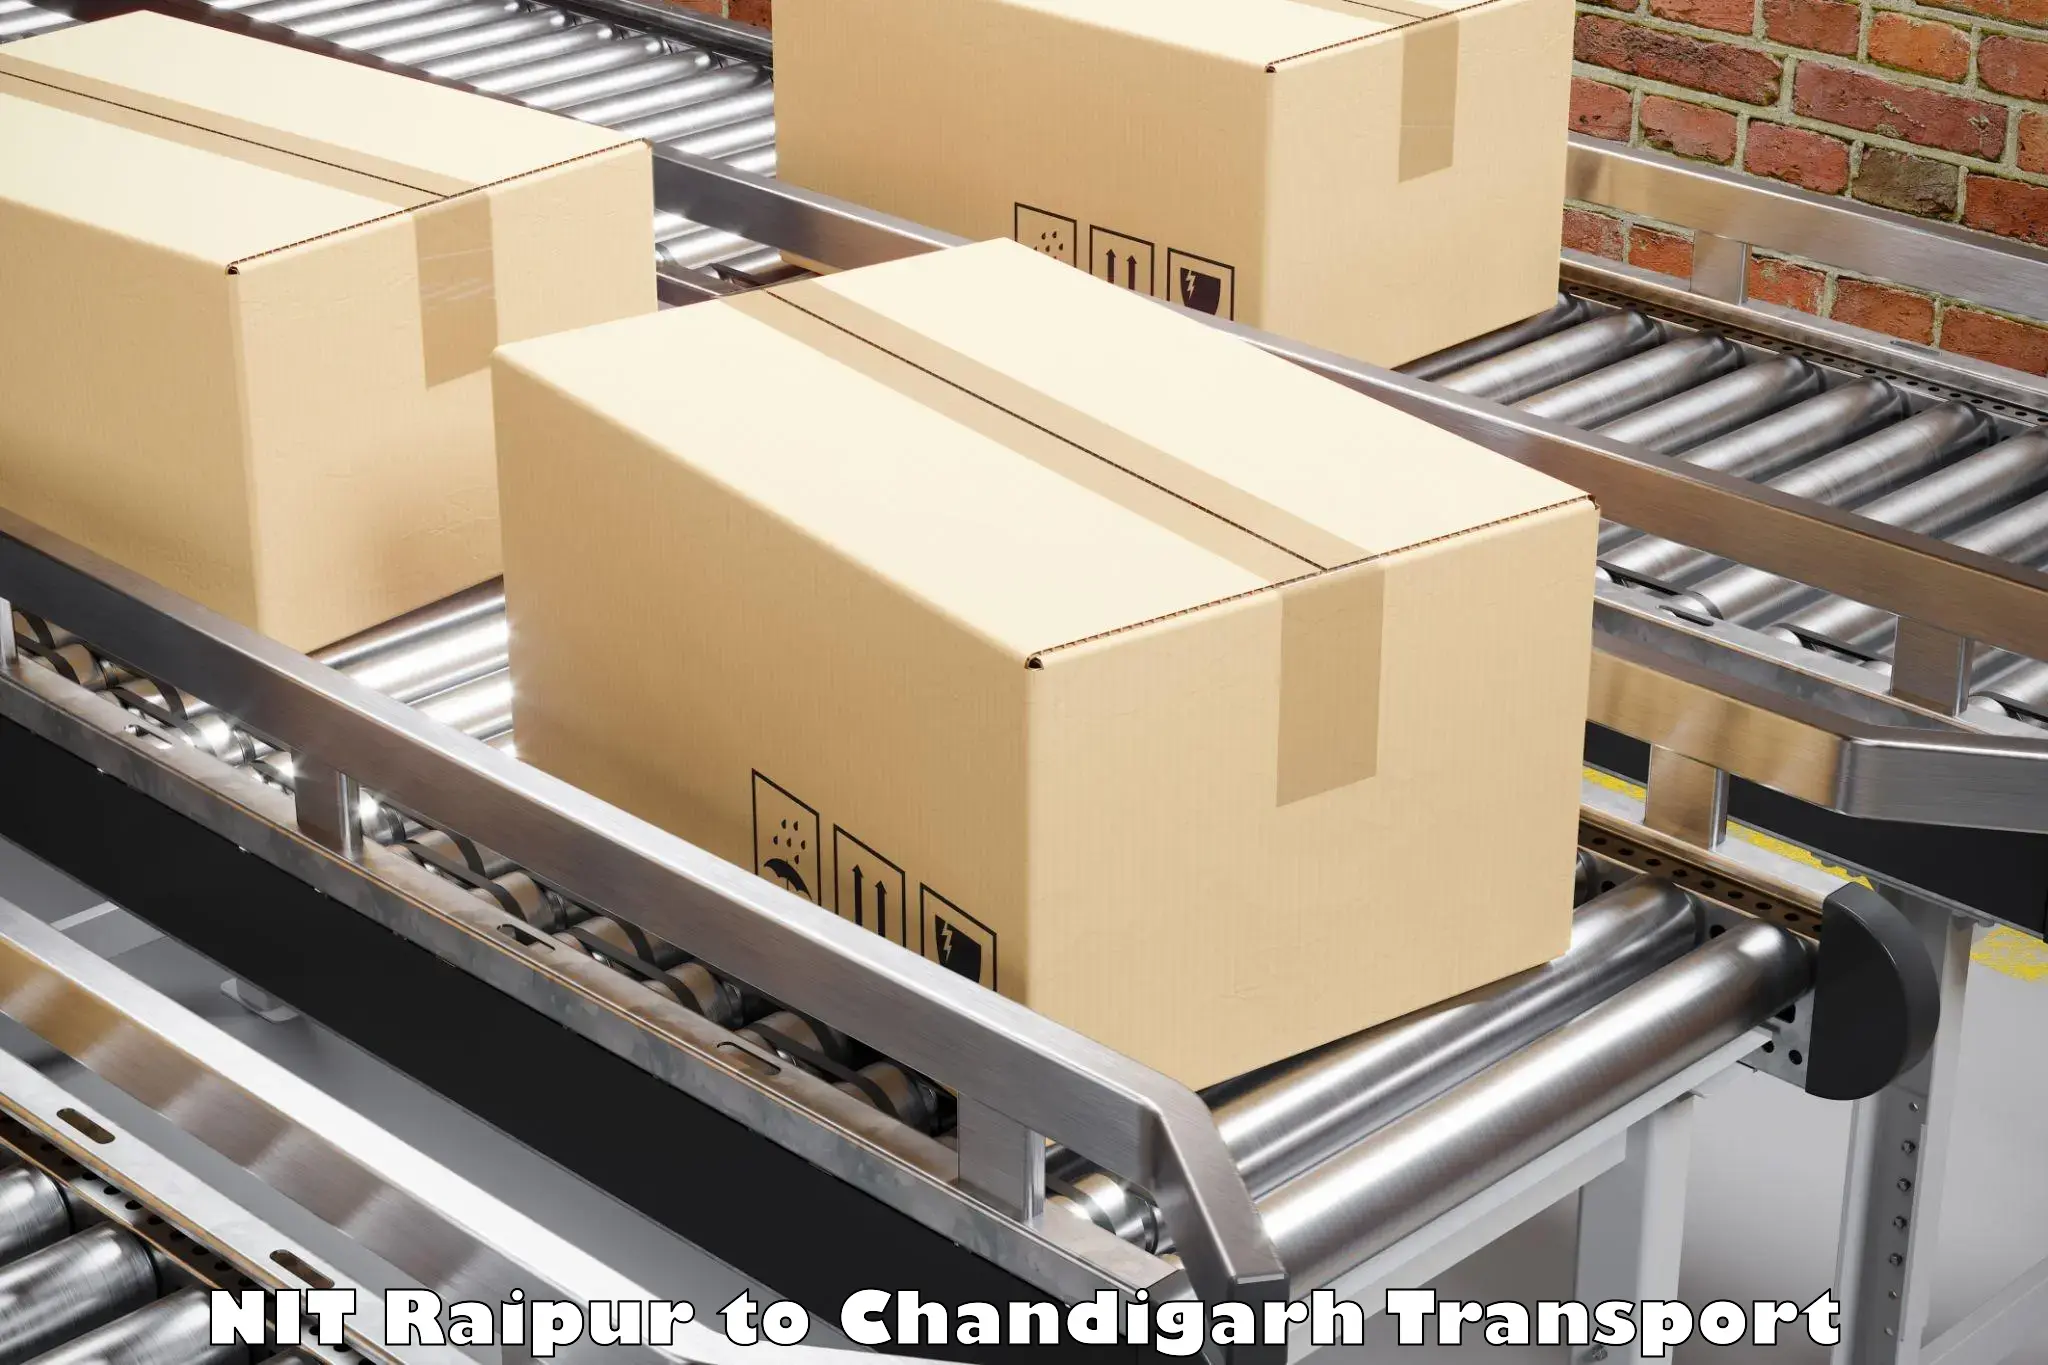 Daily parcel service transport NIT Raipur to Chandigarh